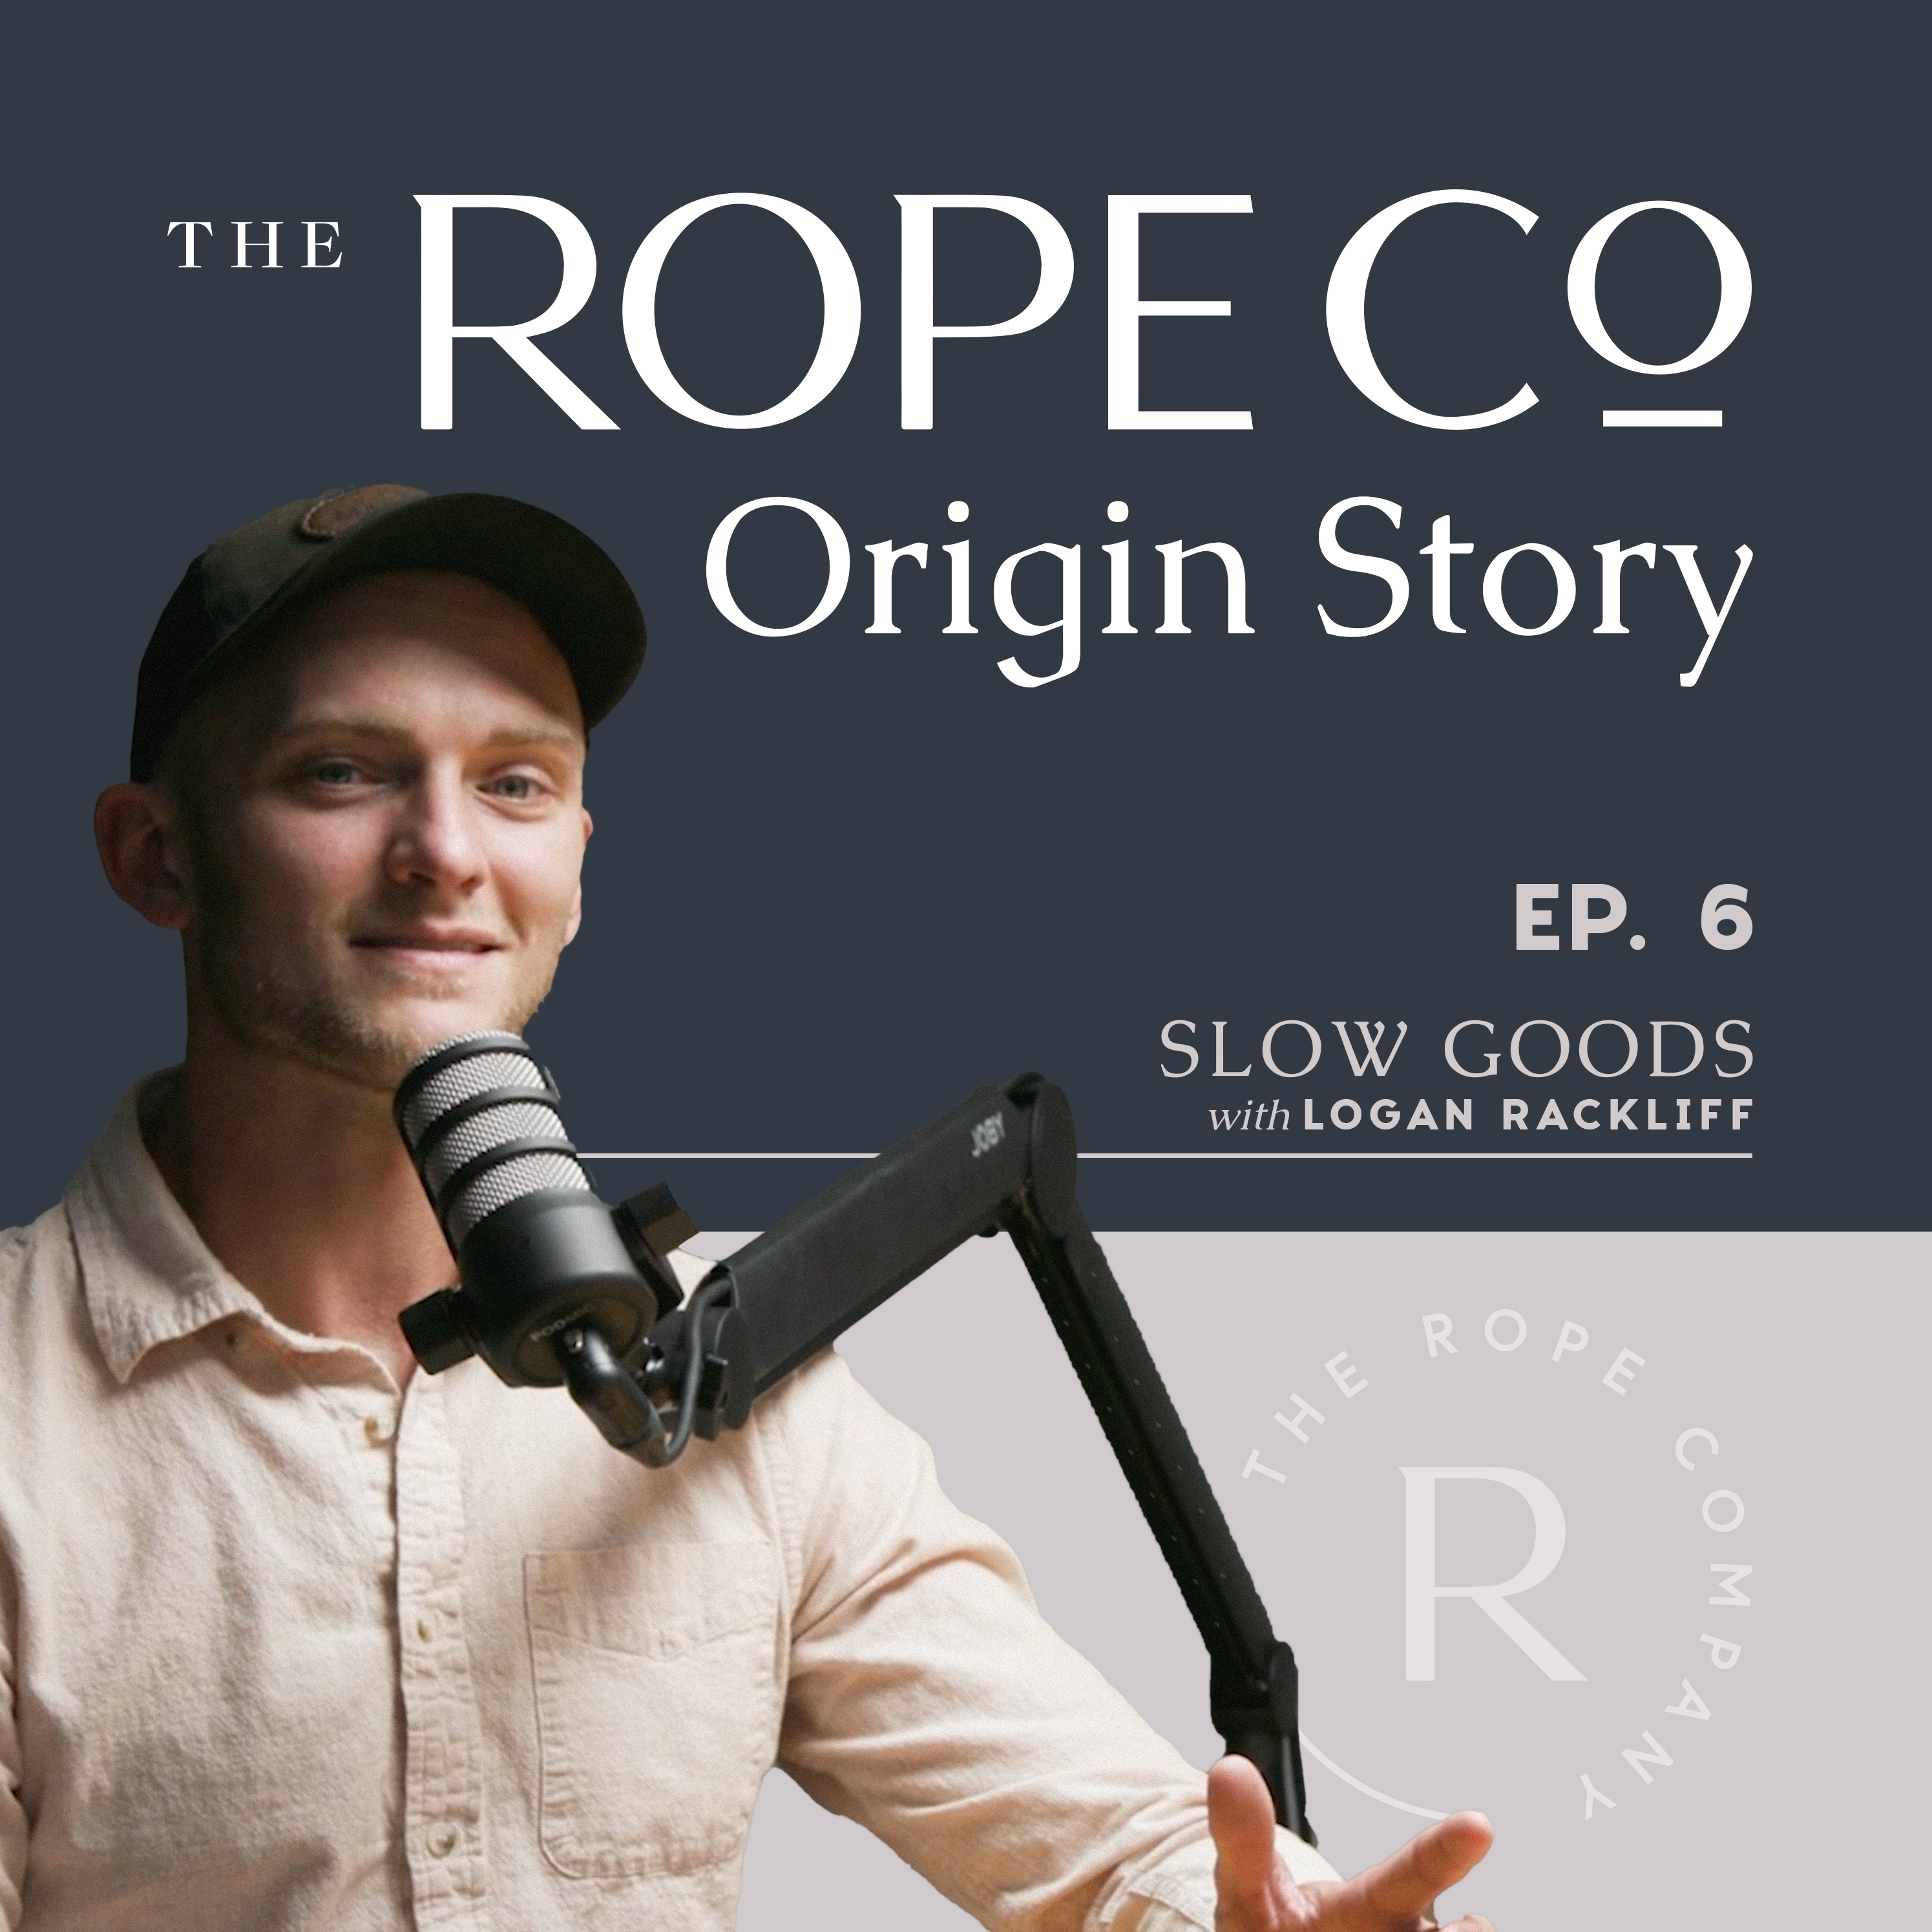 The Rope Co Origin Story | The Slow Goods Podcast | Episode 6